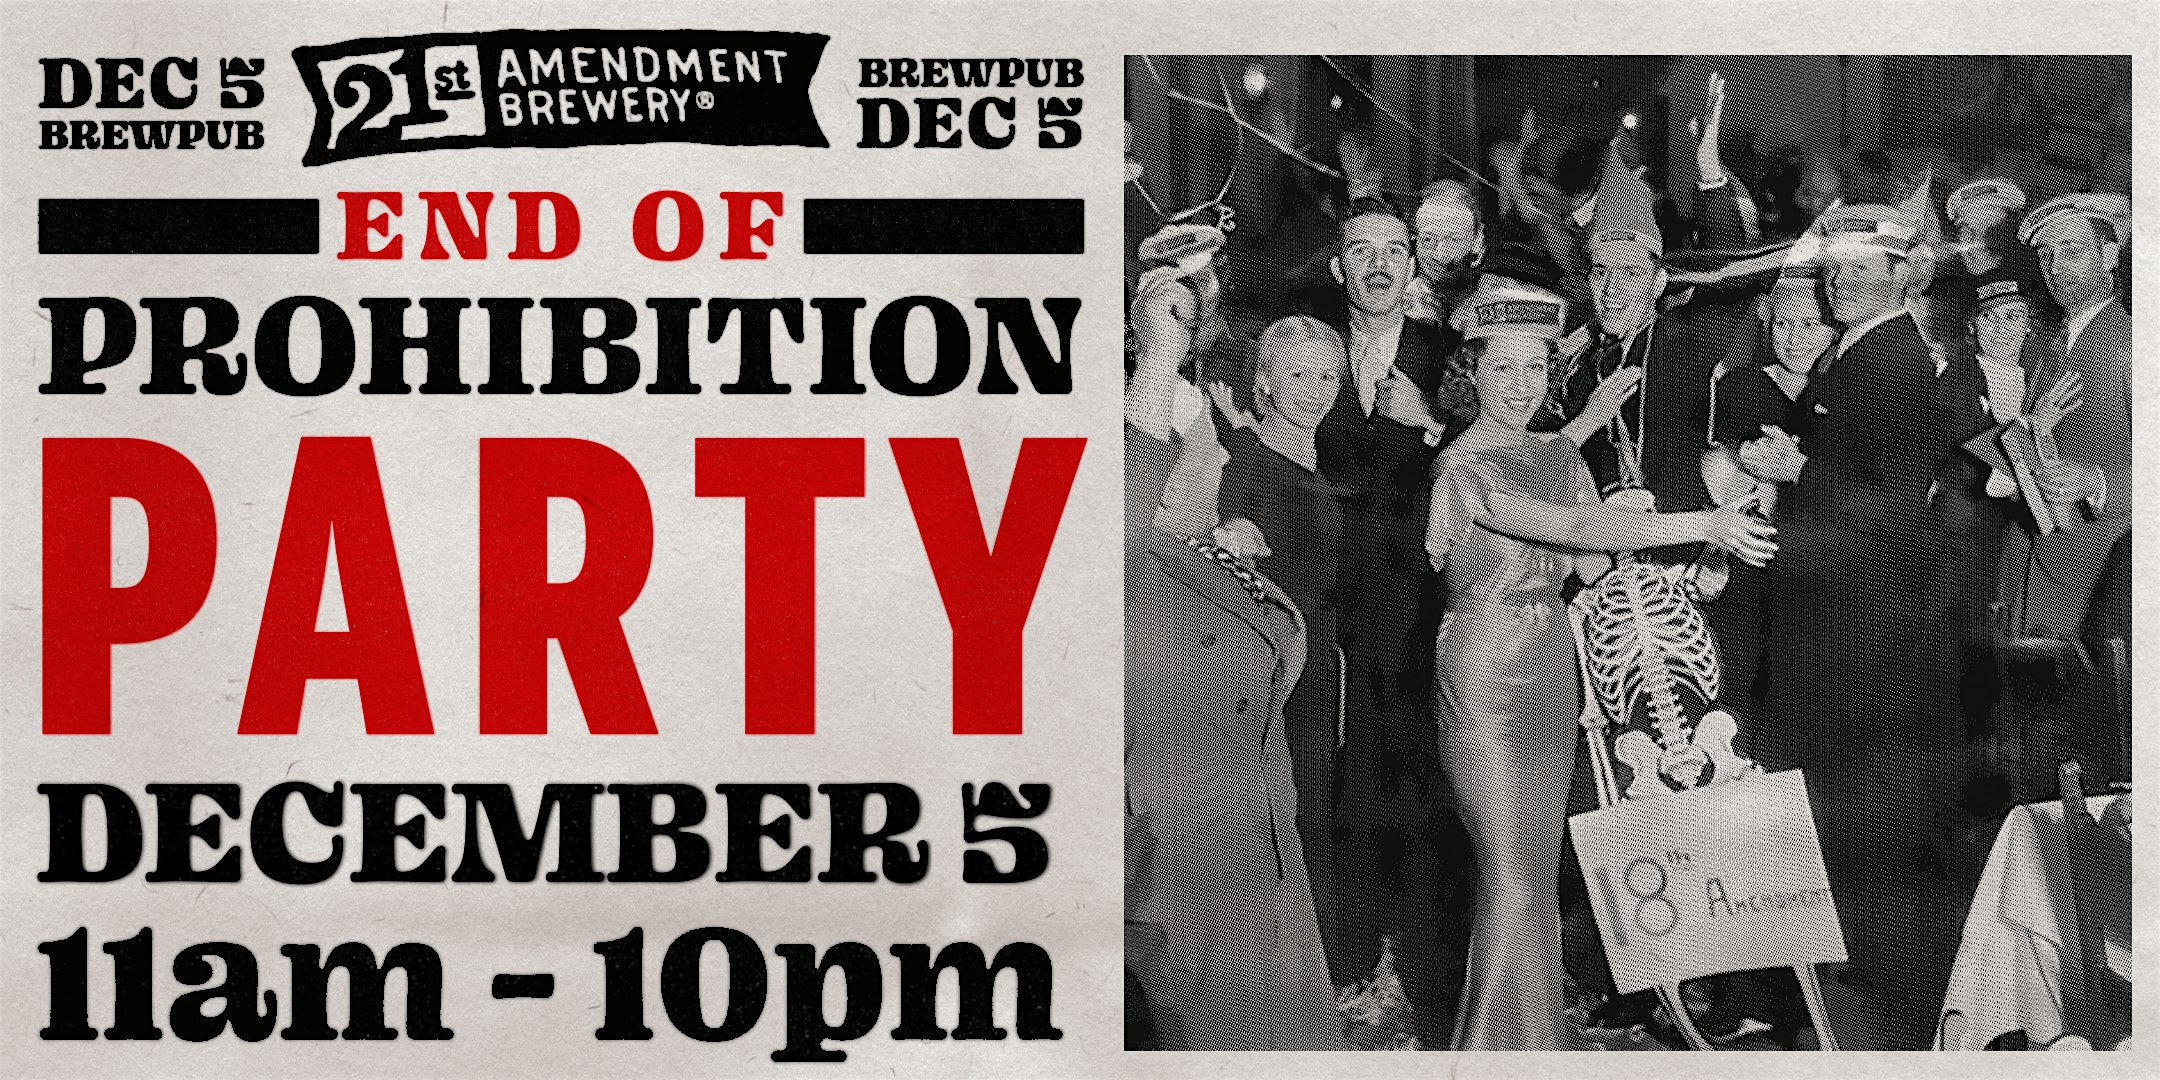 End of Prohibition Party at 21st Amendment Brewery